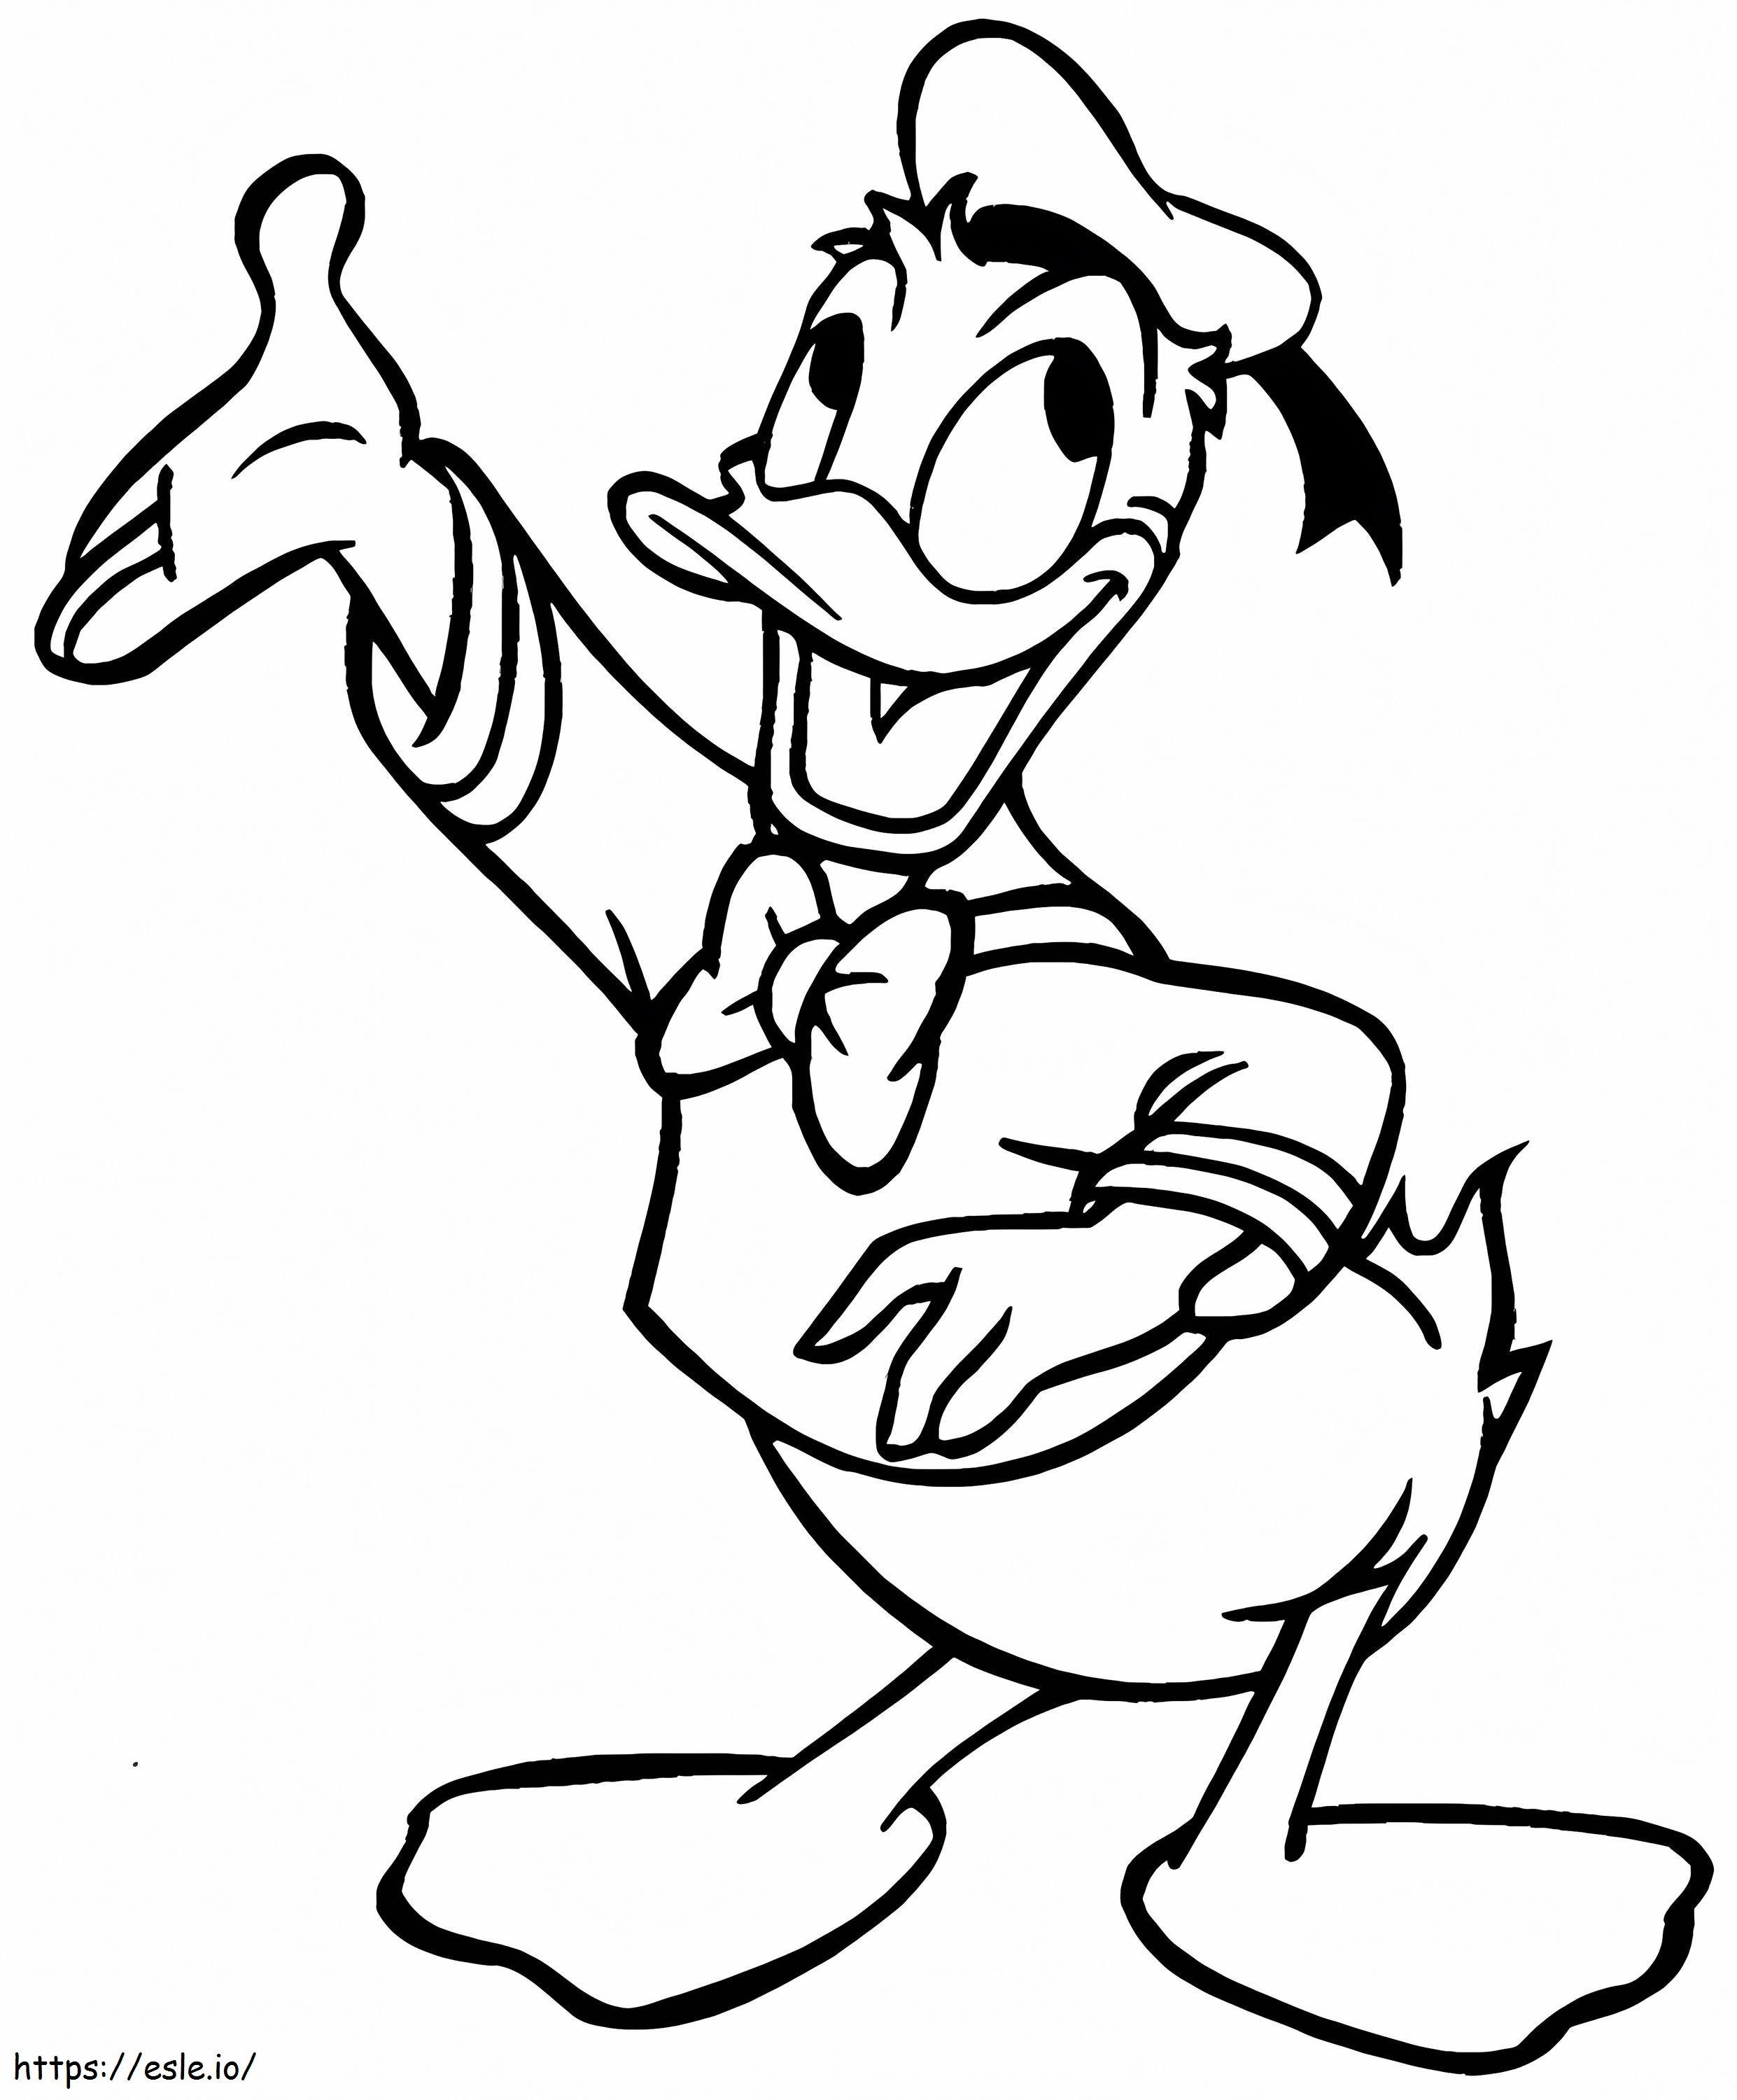 Donald Is Happy coloring page